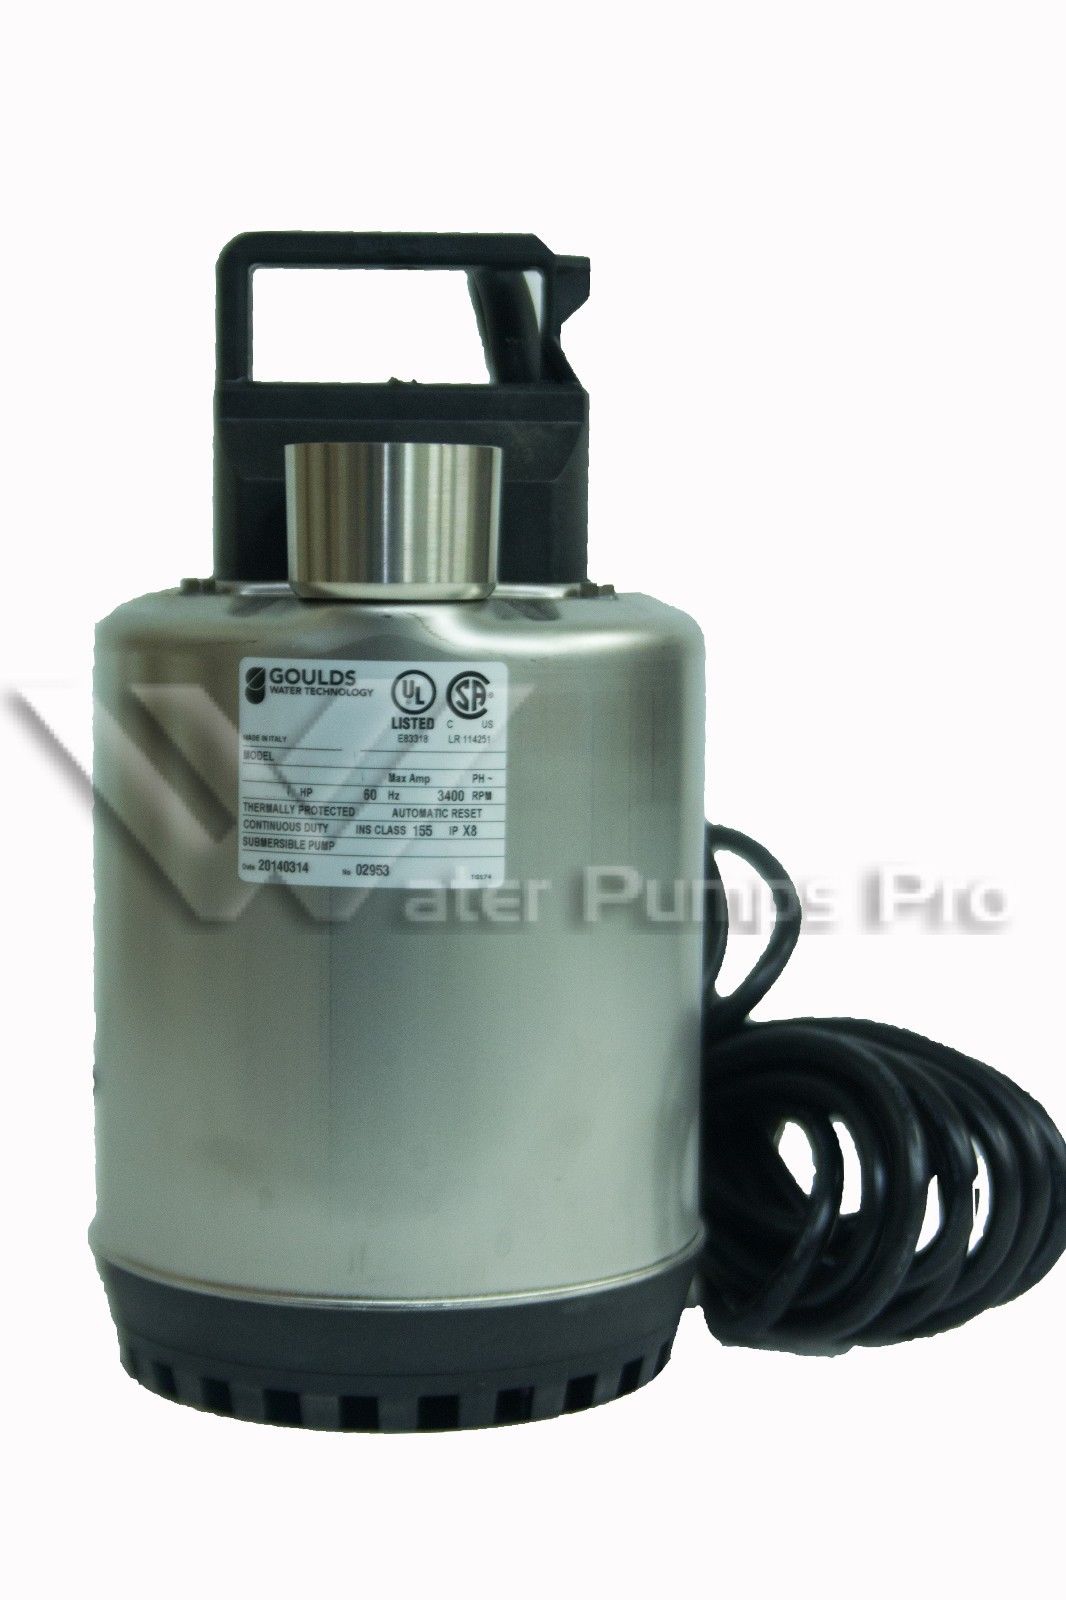 Goulds LSP0711F 3/4HP 115V- Submersible Sump Pump